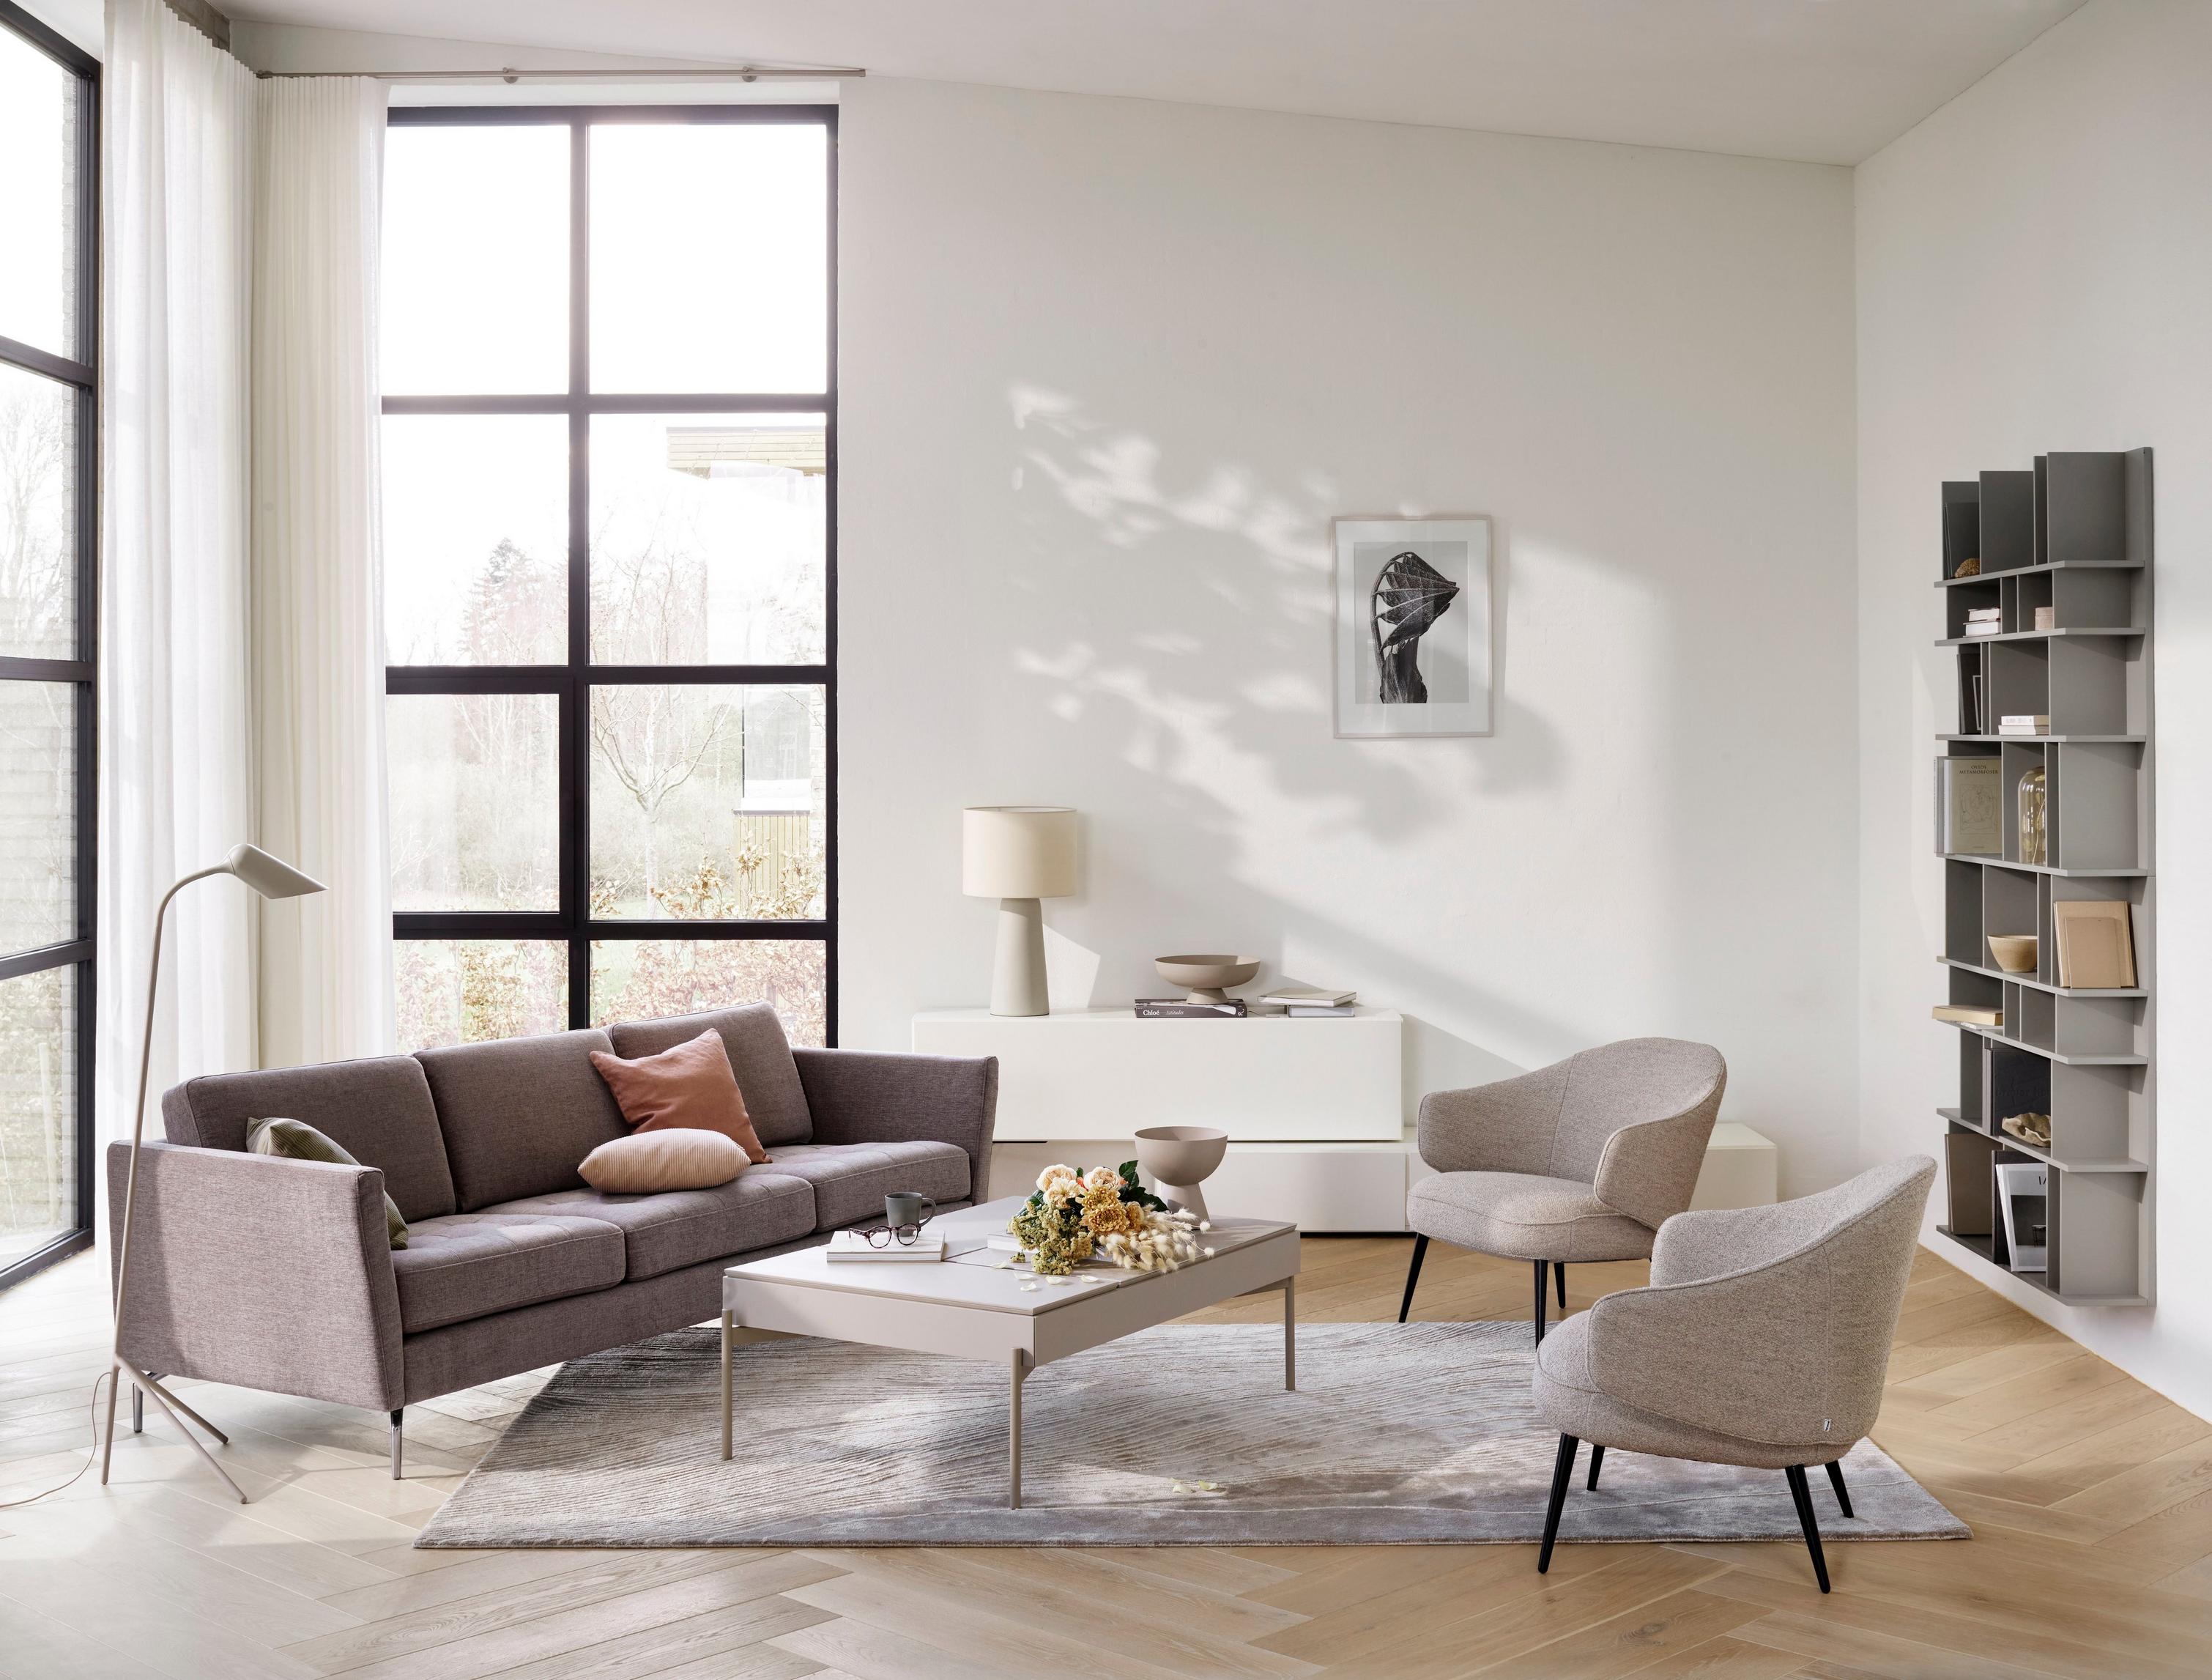 Osaka sofa with its tufted seats in a grey Tomelilla fabric with the Chiva coffee table with storage.